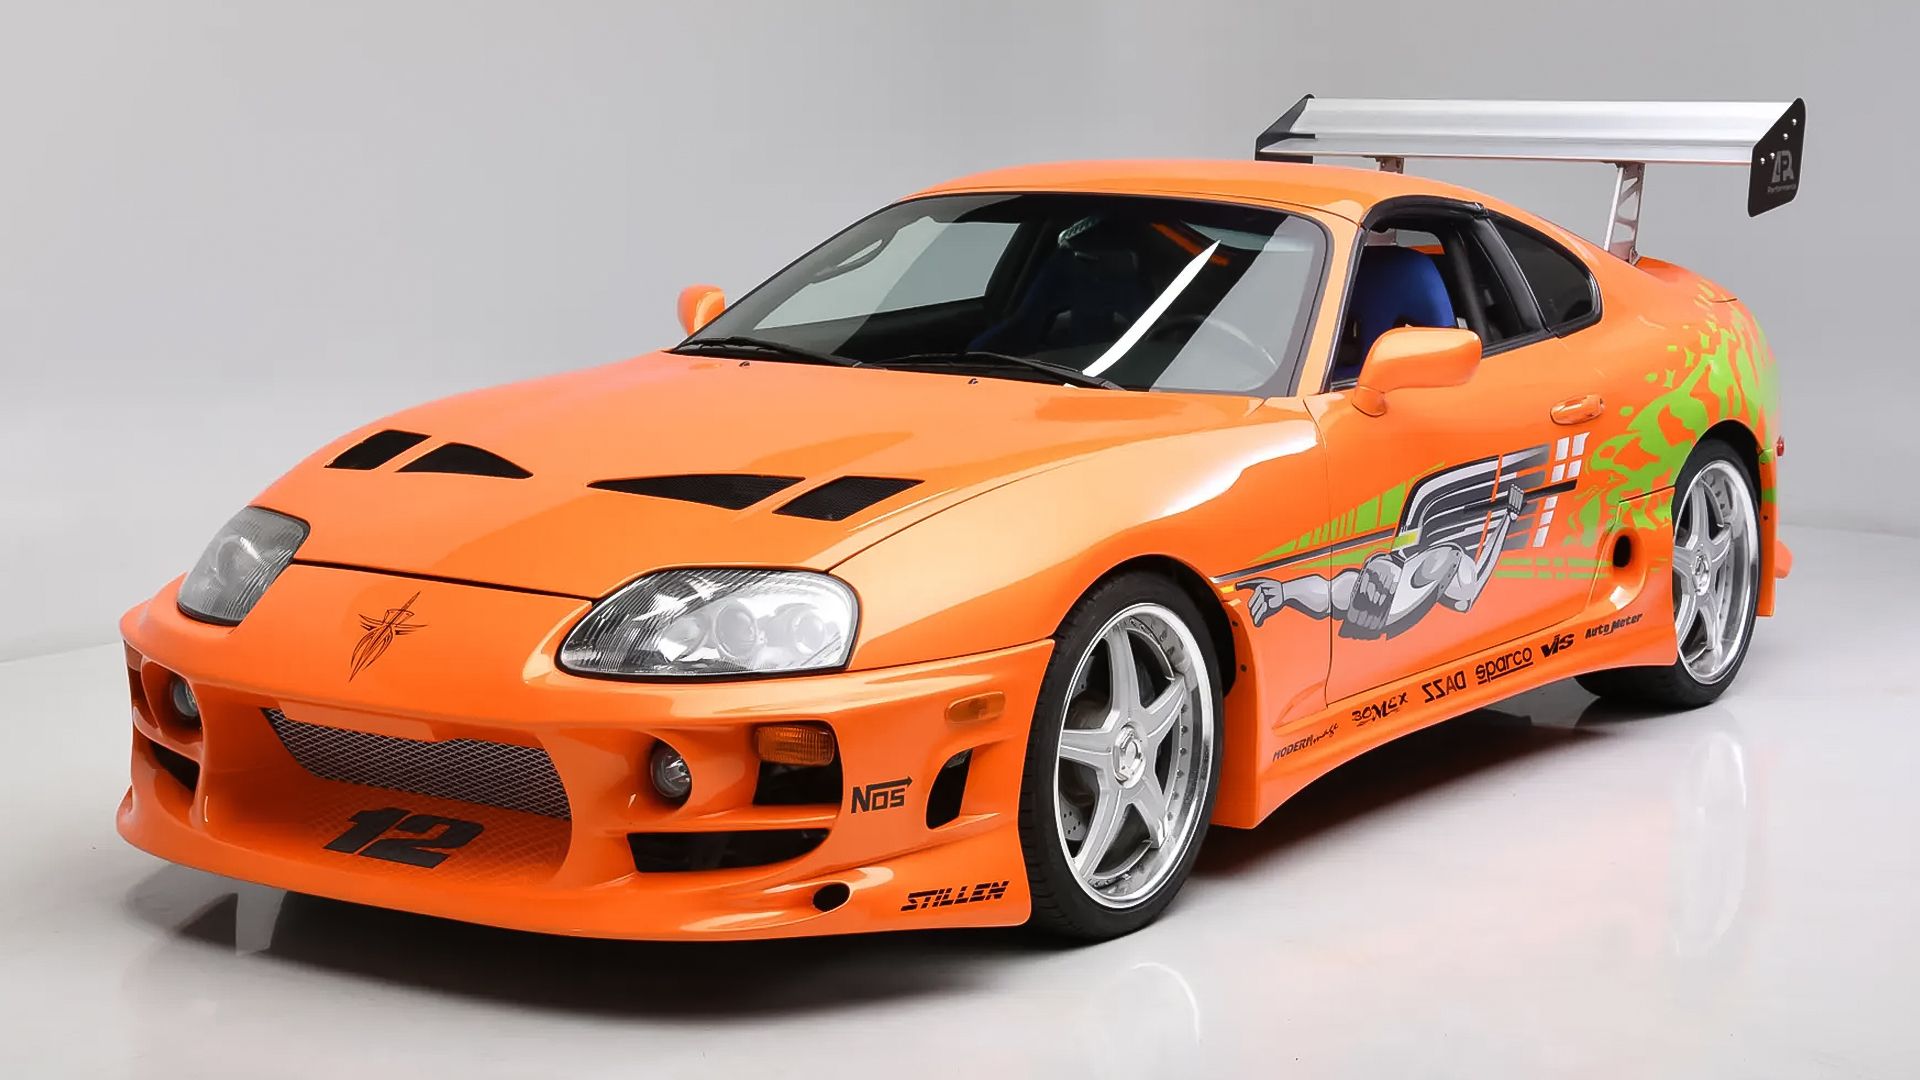 This Mitsubishi Eclipse sold fast for a furious $170,500